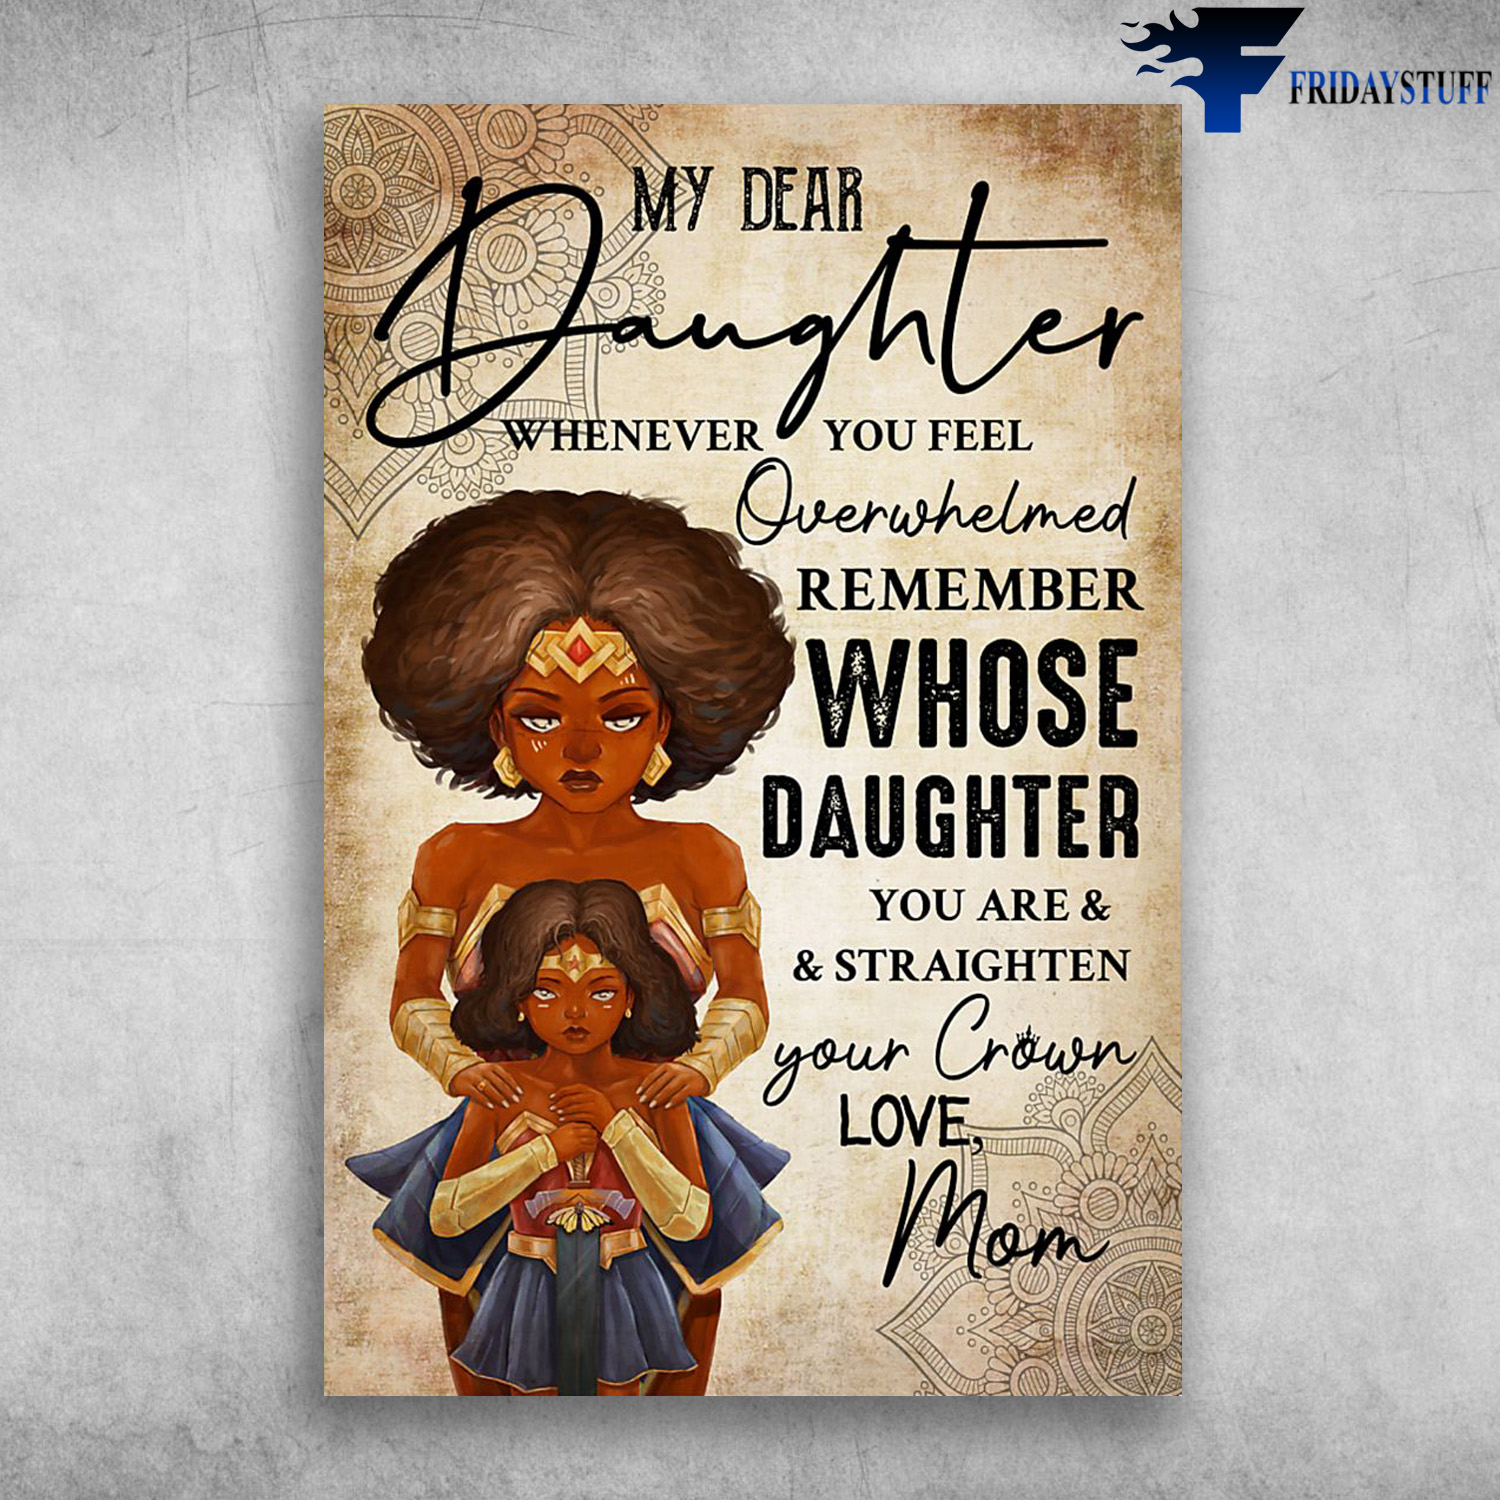 Mon And Daughter Wonder Woman - My Dear Daughter, Whenever You Feel Overwhelmed, Remember Whose Daughter You Are, And Straighten Your Crown, Love, Mom